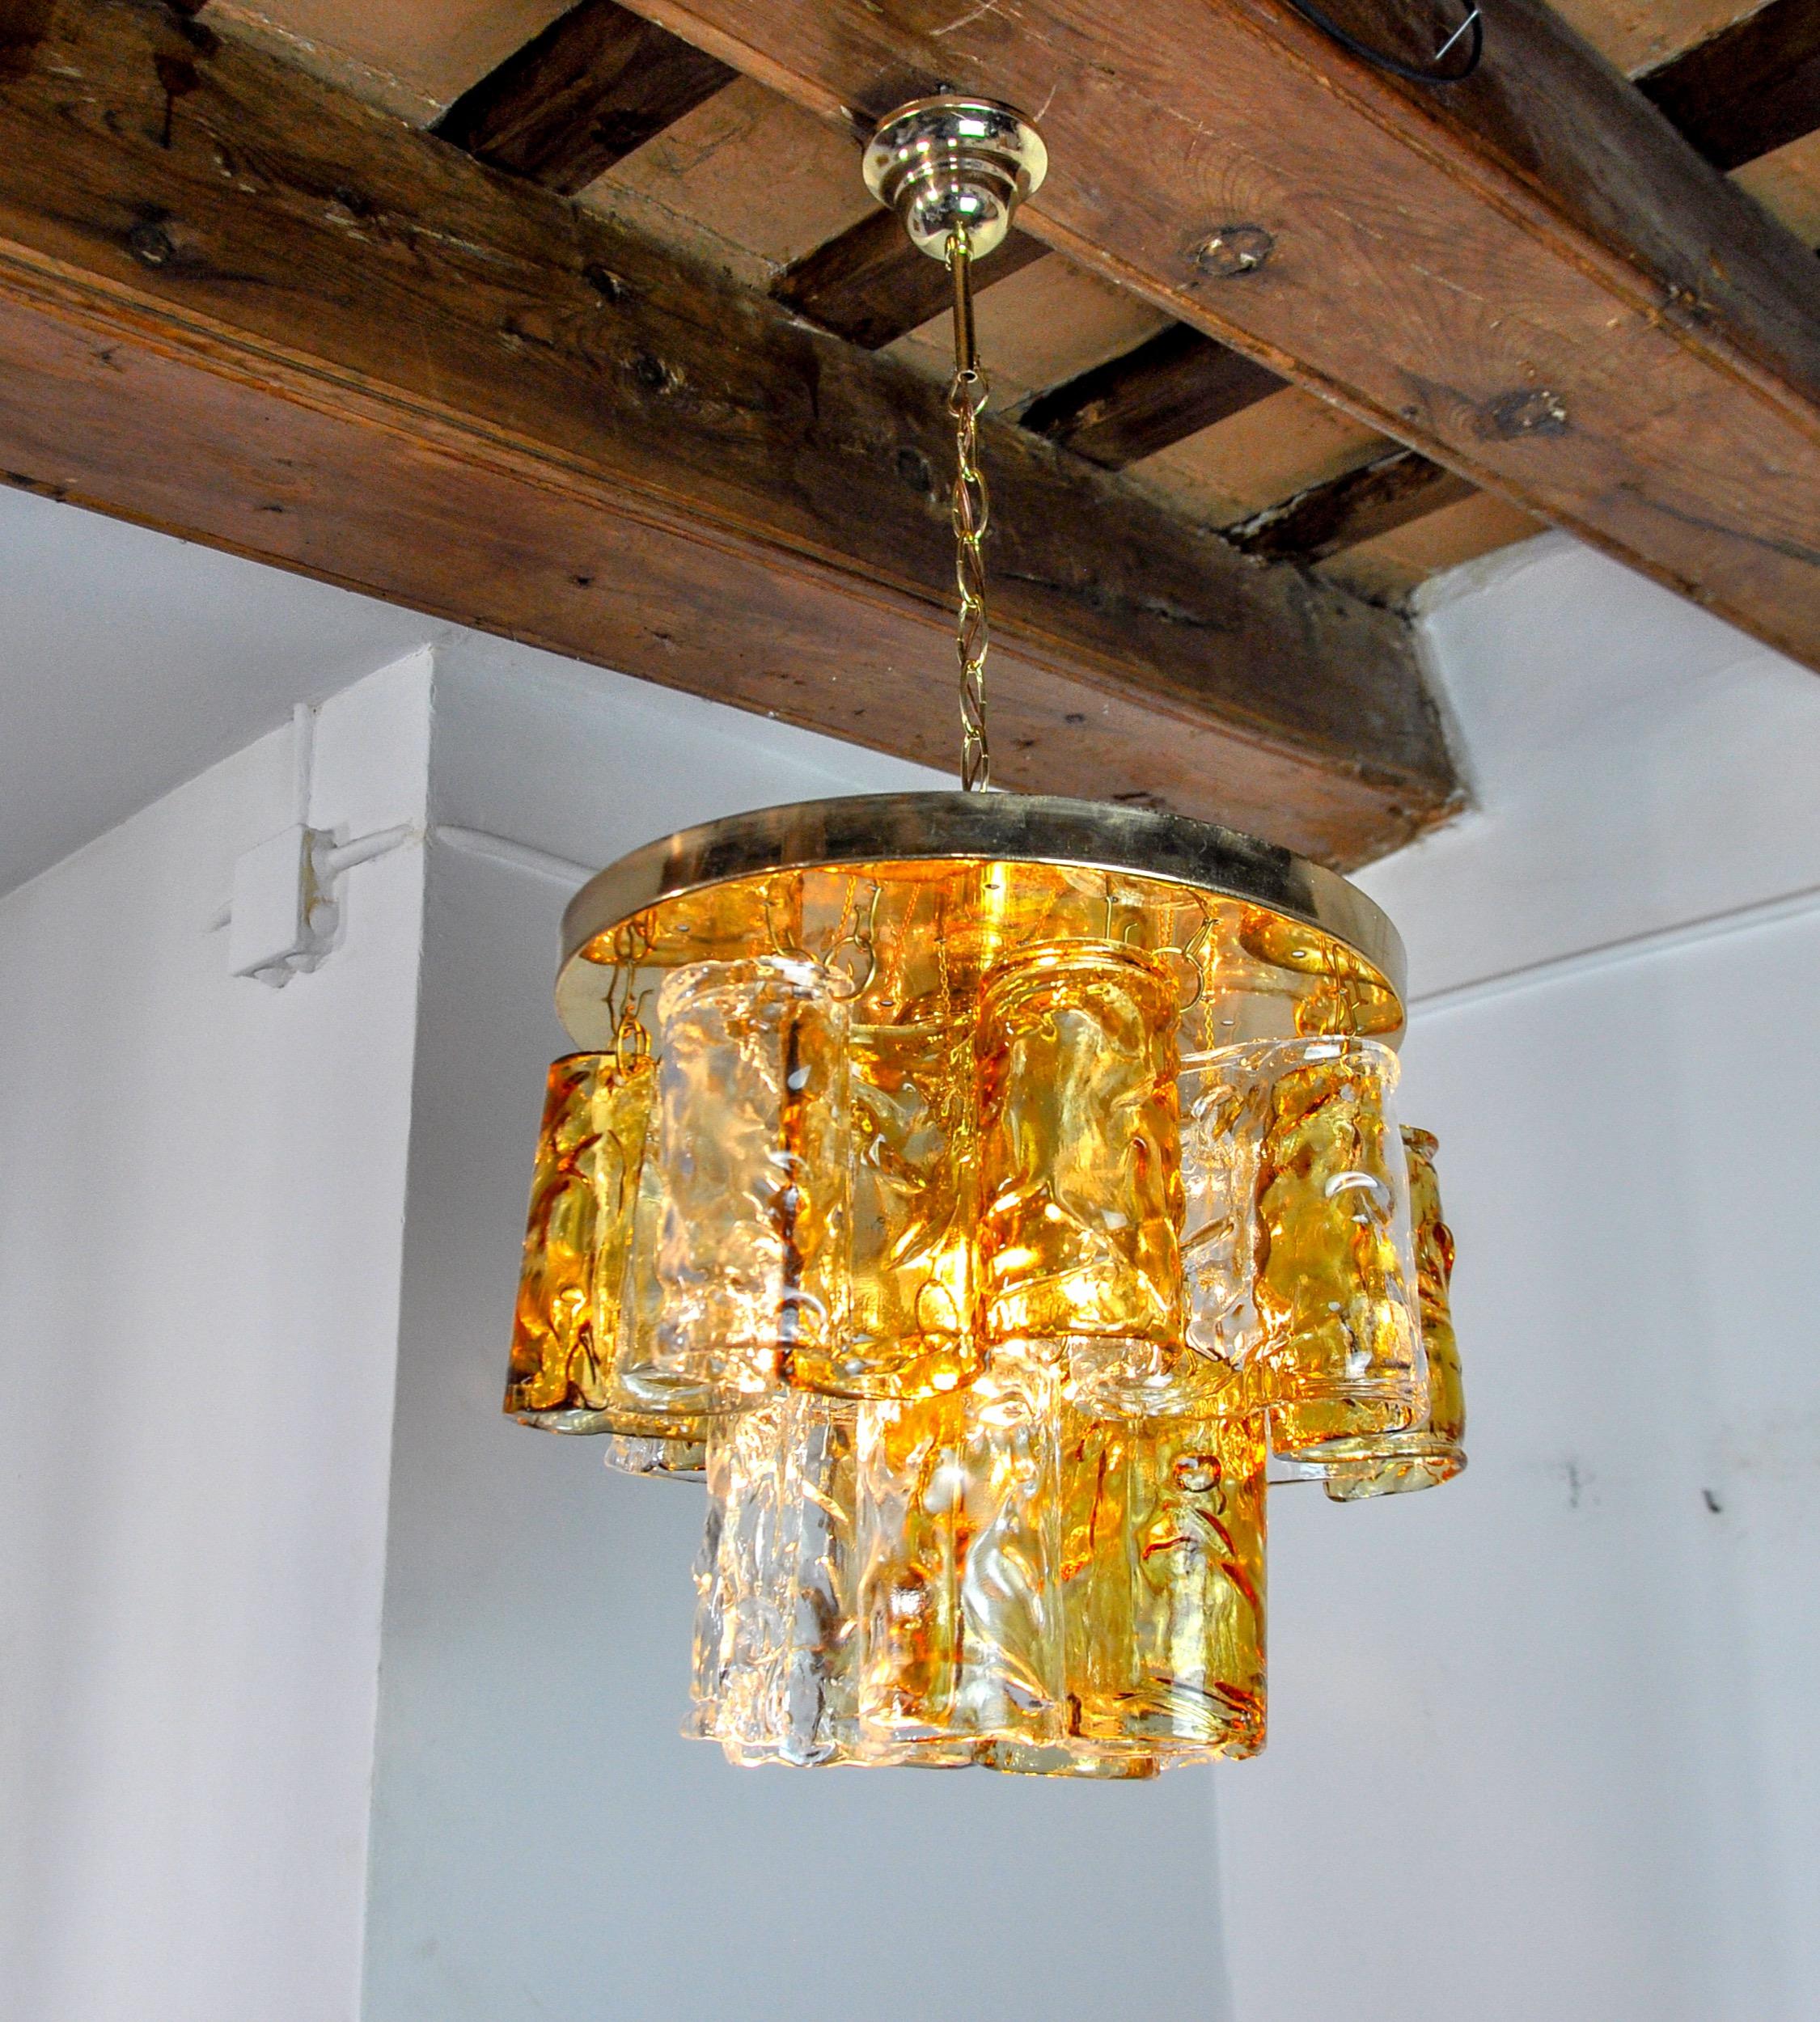 Superb and rare zero quattro chandelier designated and produced in the 70s in murano, italy. Golden structure and orange curved crystals spread over 3 levels in perfect condition. Rare design object that will illuminate your interior perfectly.